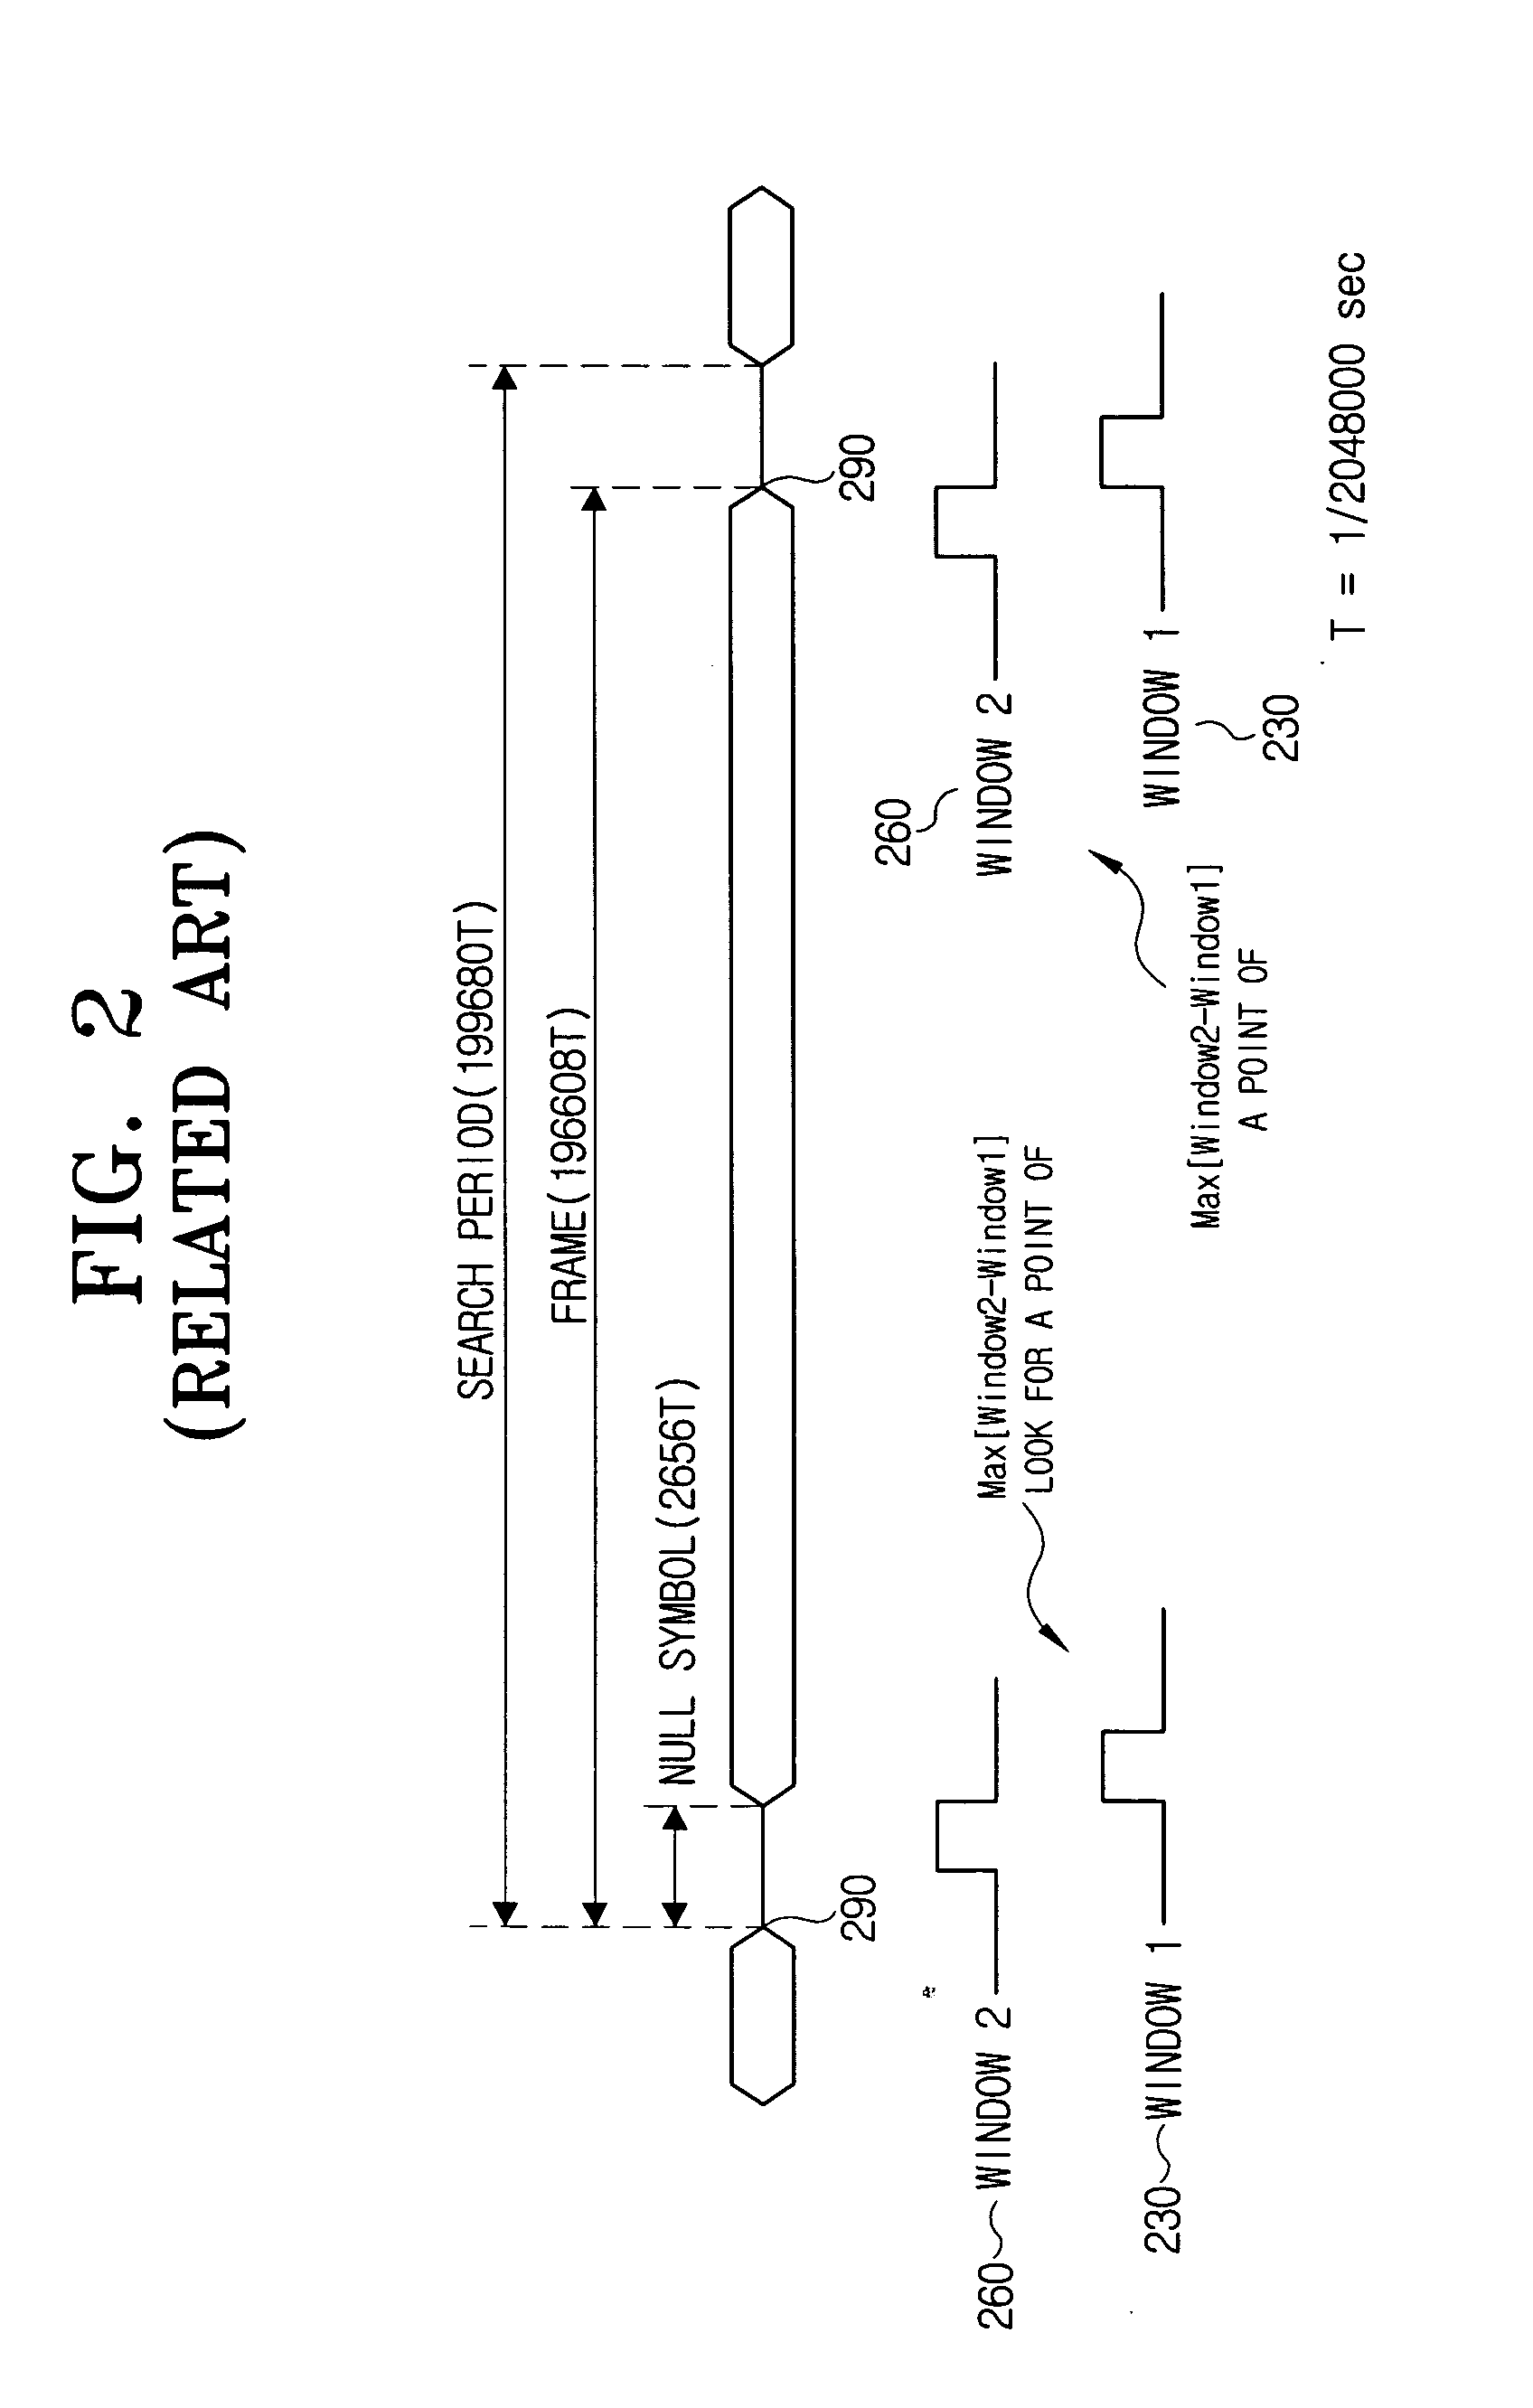 Method of and system for controlling frame synchronization for European Digital Audio Broadcasting